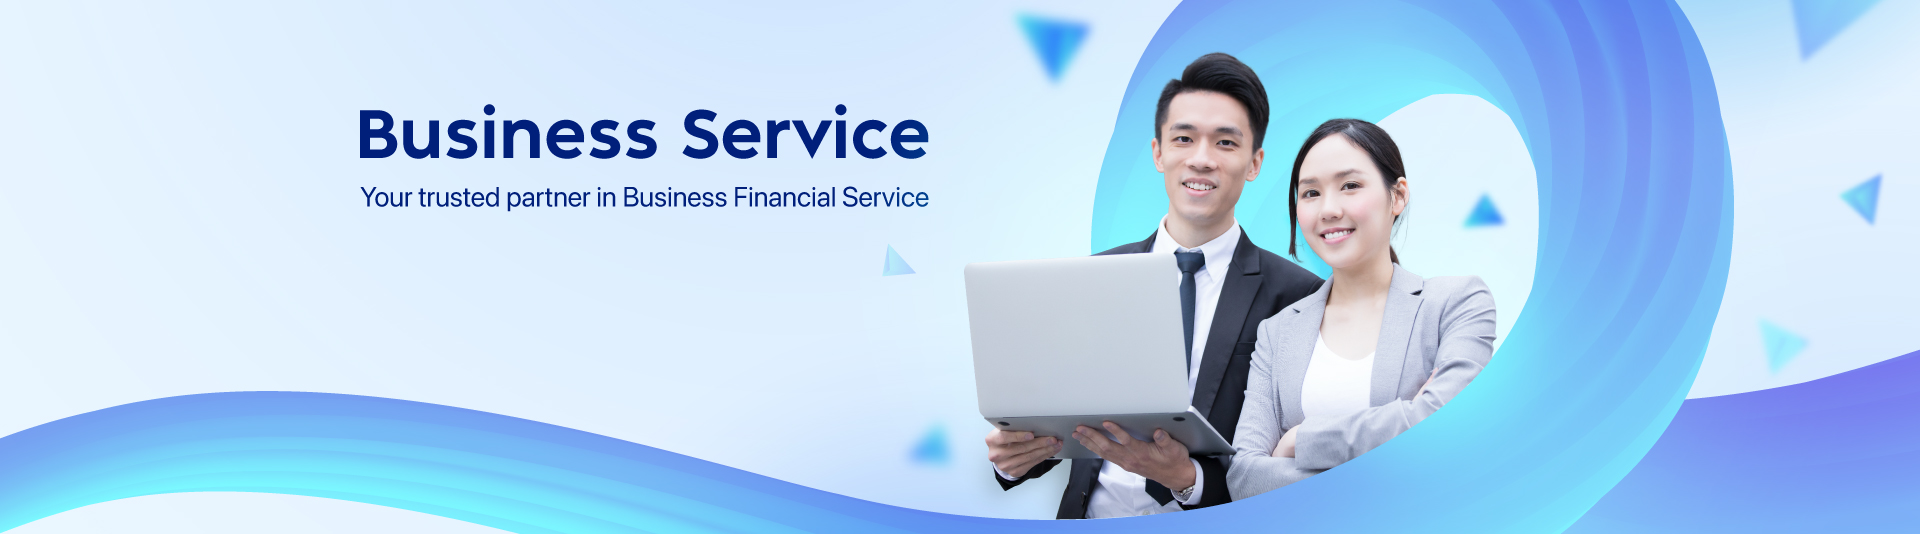 Bussiness Service